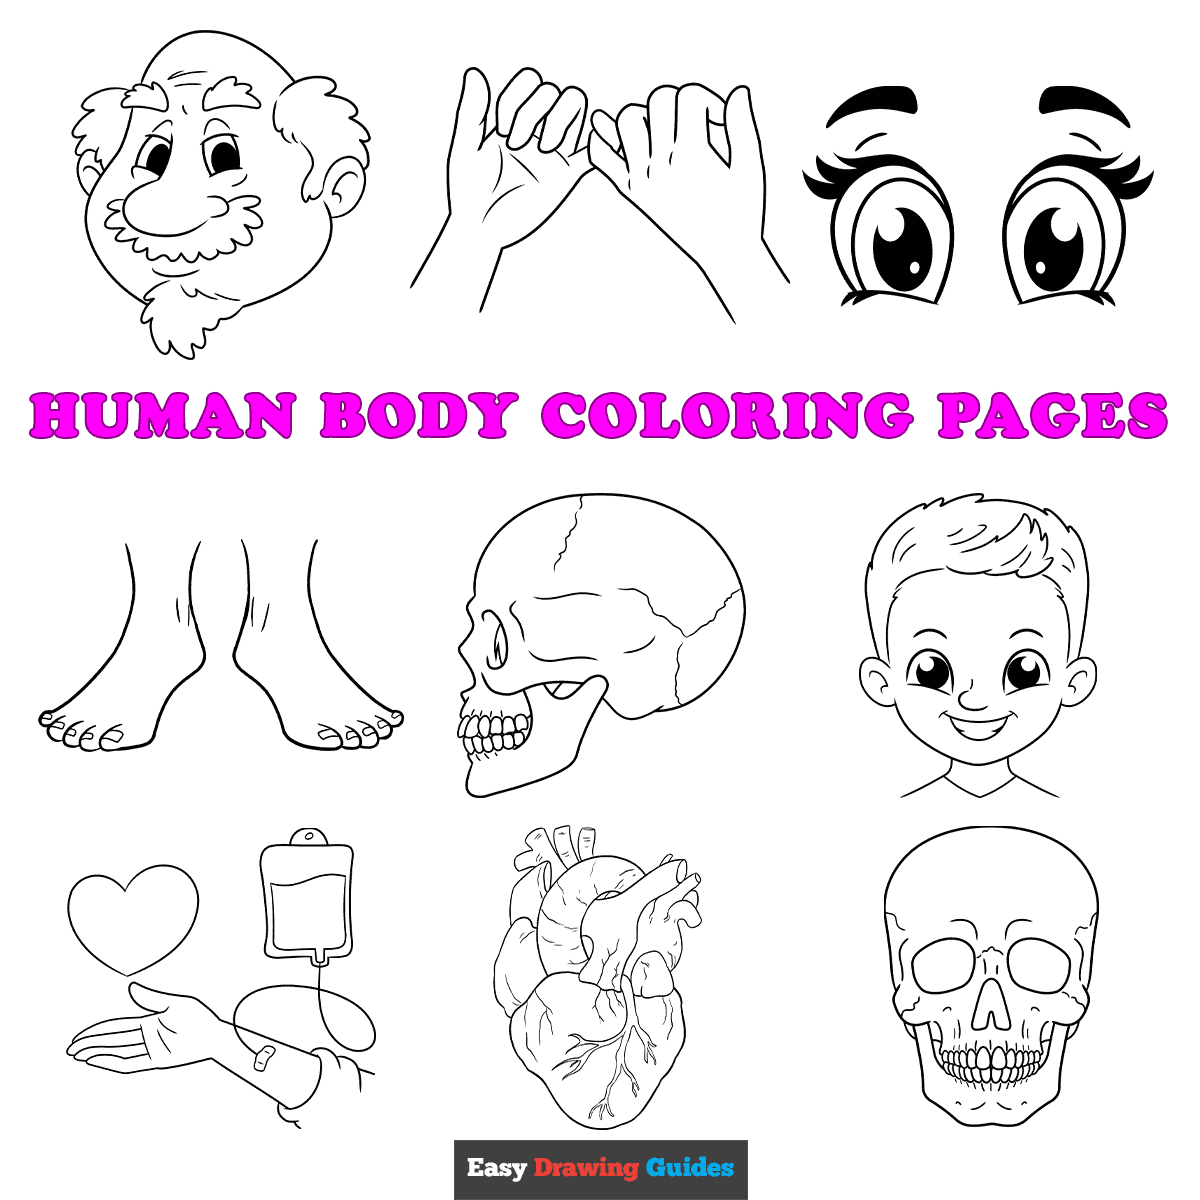 Free printable human body coloring pages for kids